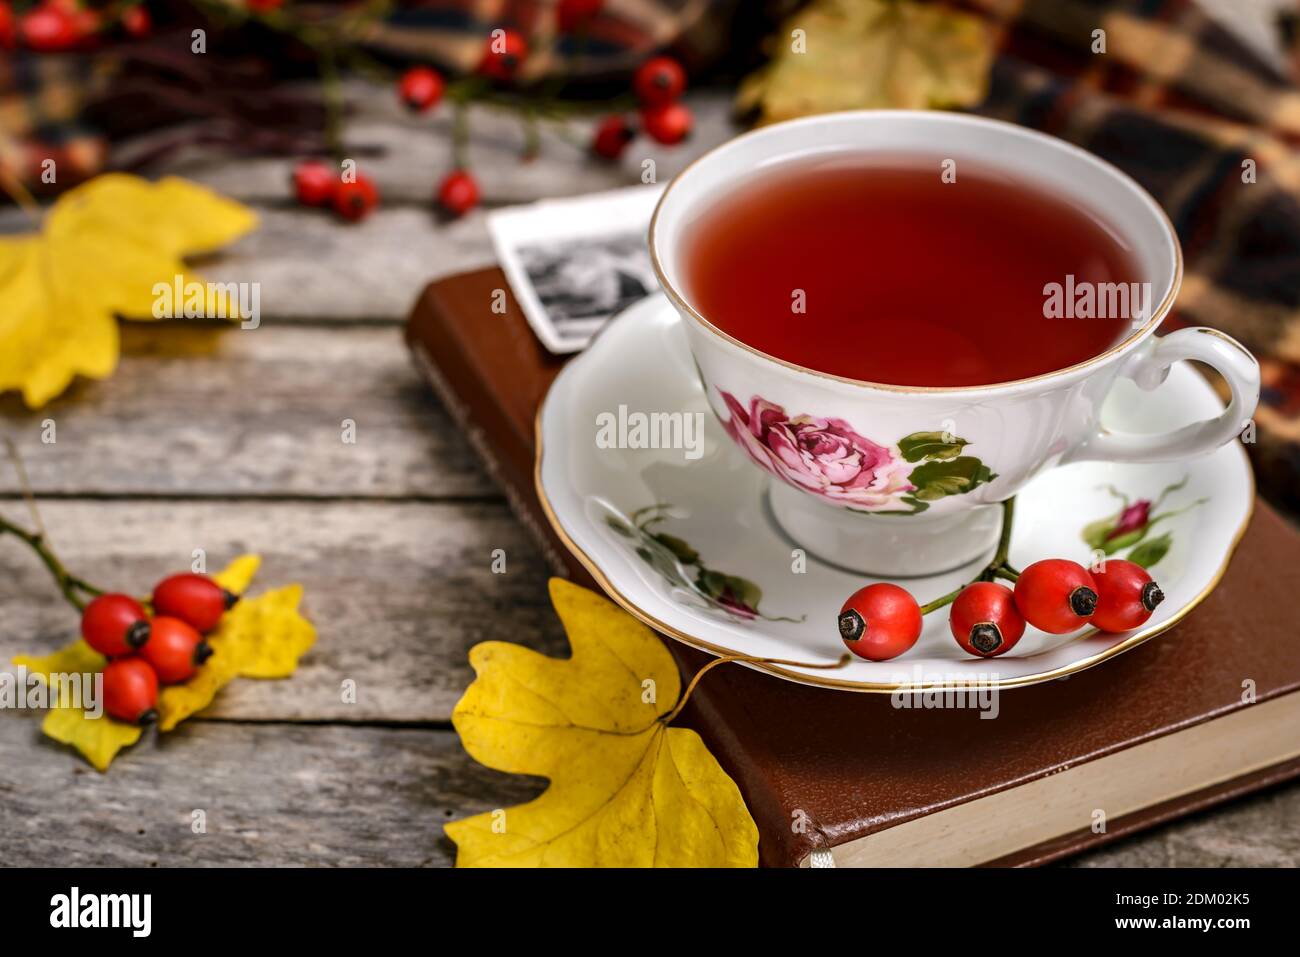 A cup of rose hip tea with fresh rose hips, old book and autumn leaves on wooden table. Autumn concept. Stock Photo